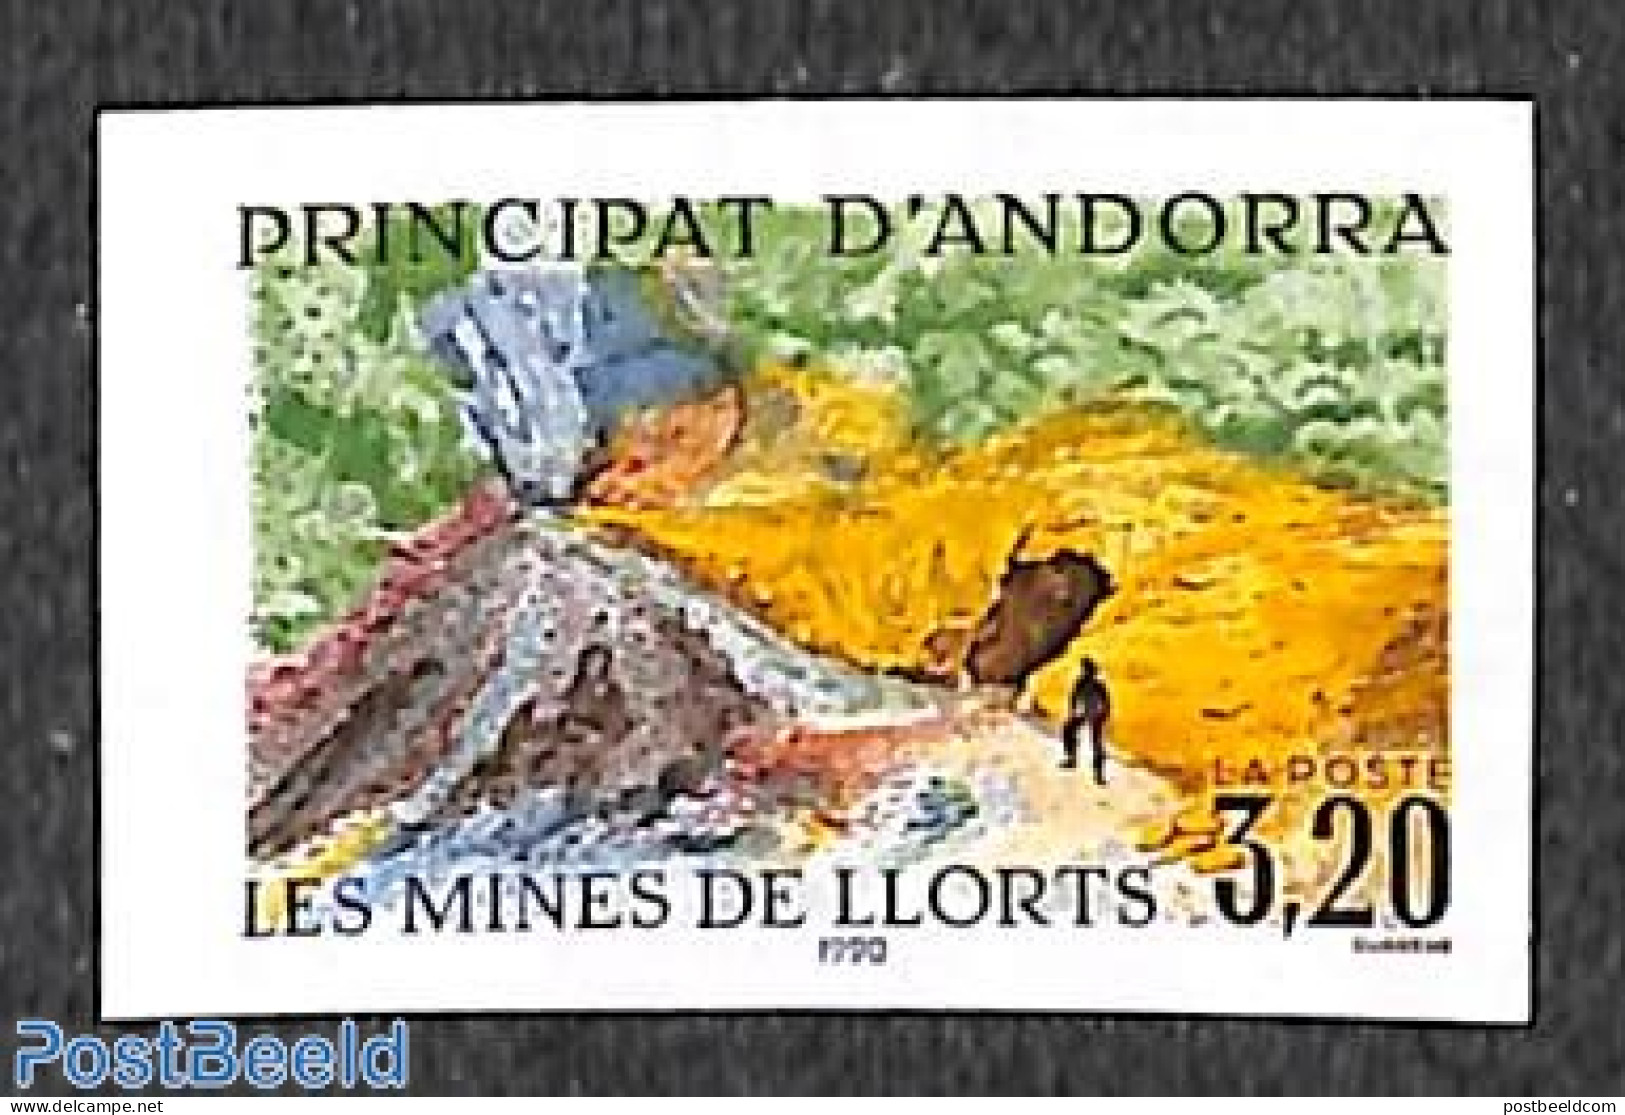 Andorra, French Post 1990 Llorts Mines 1v, Imperforated, Mint NH, Science - Mining - Unused Stamps